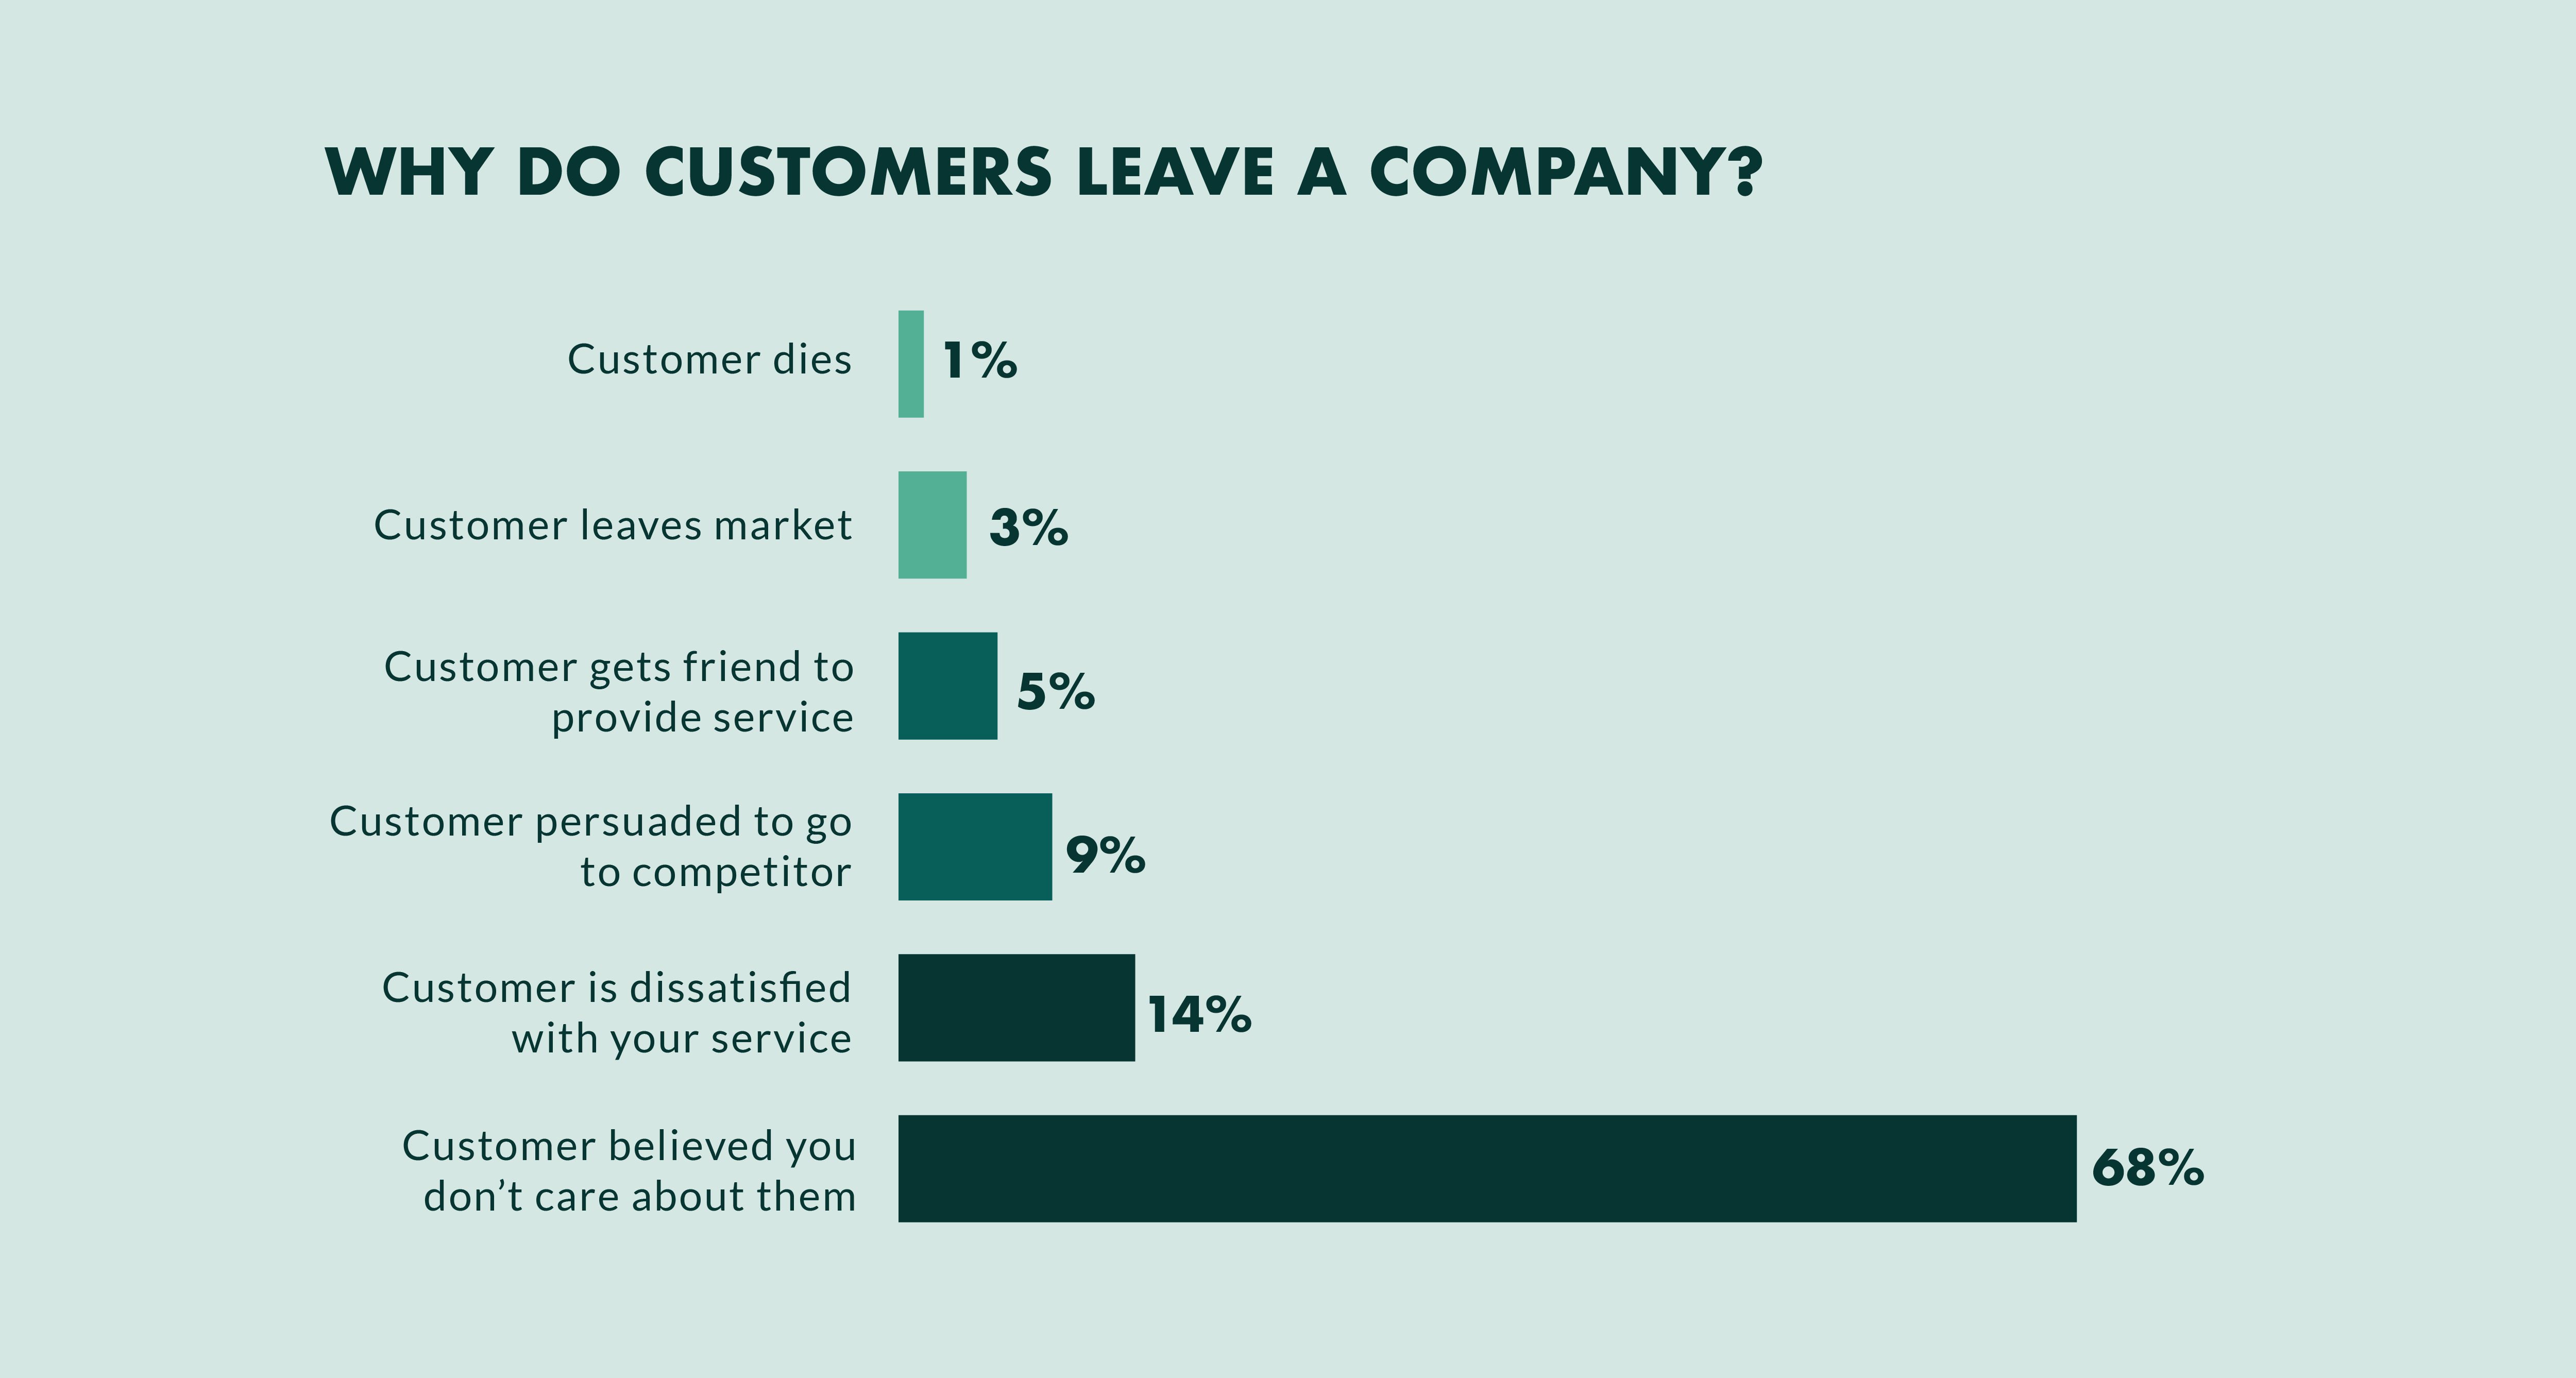 customers will leave if they feel you don't care about them